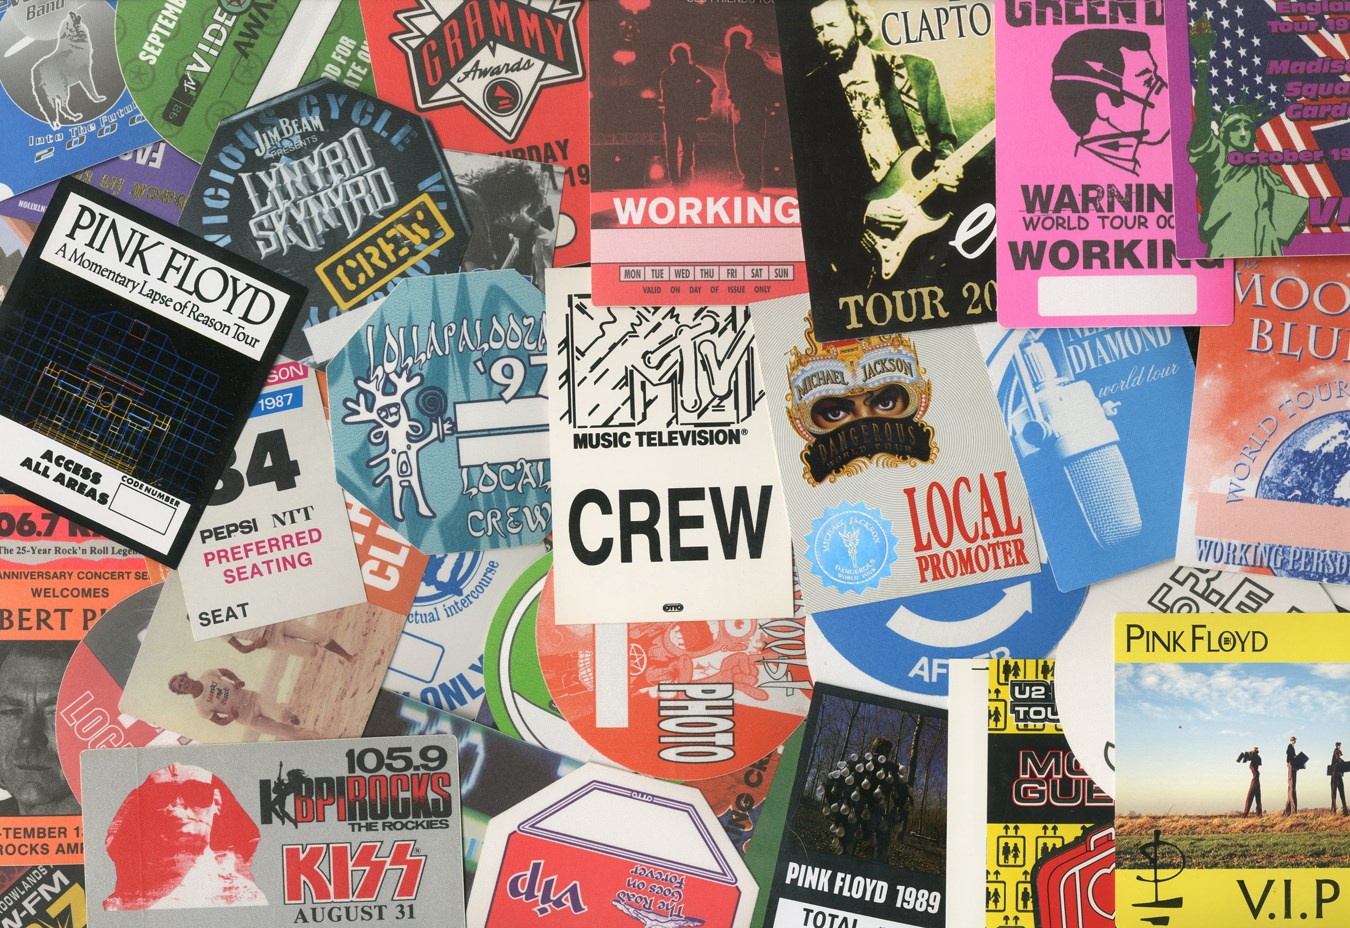 Rock 'N' Roll - Massive 1980s-90s Huge Rock Concert Backstage Passes Collection from Otto (450+)